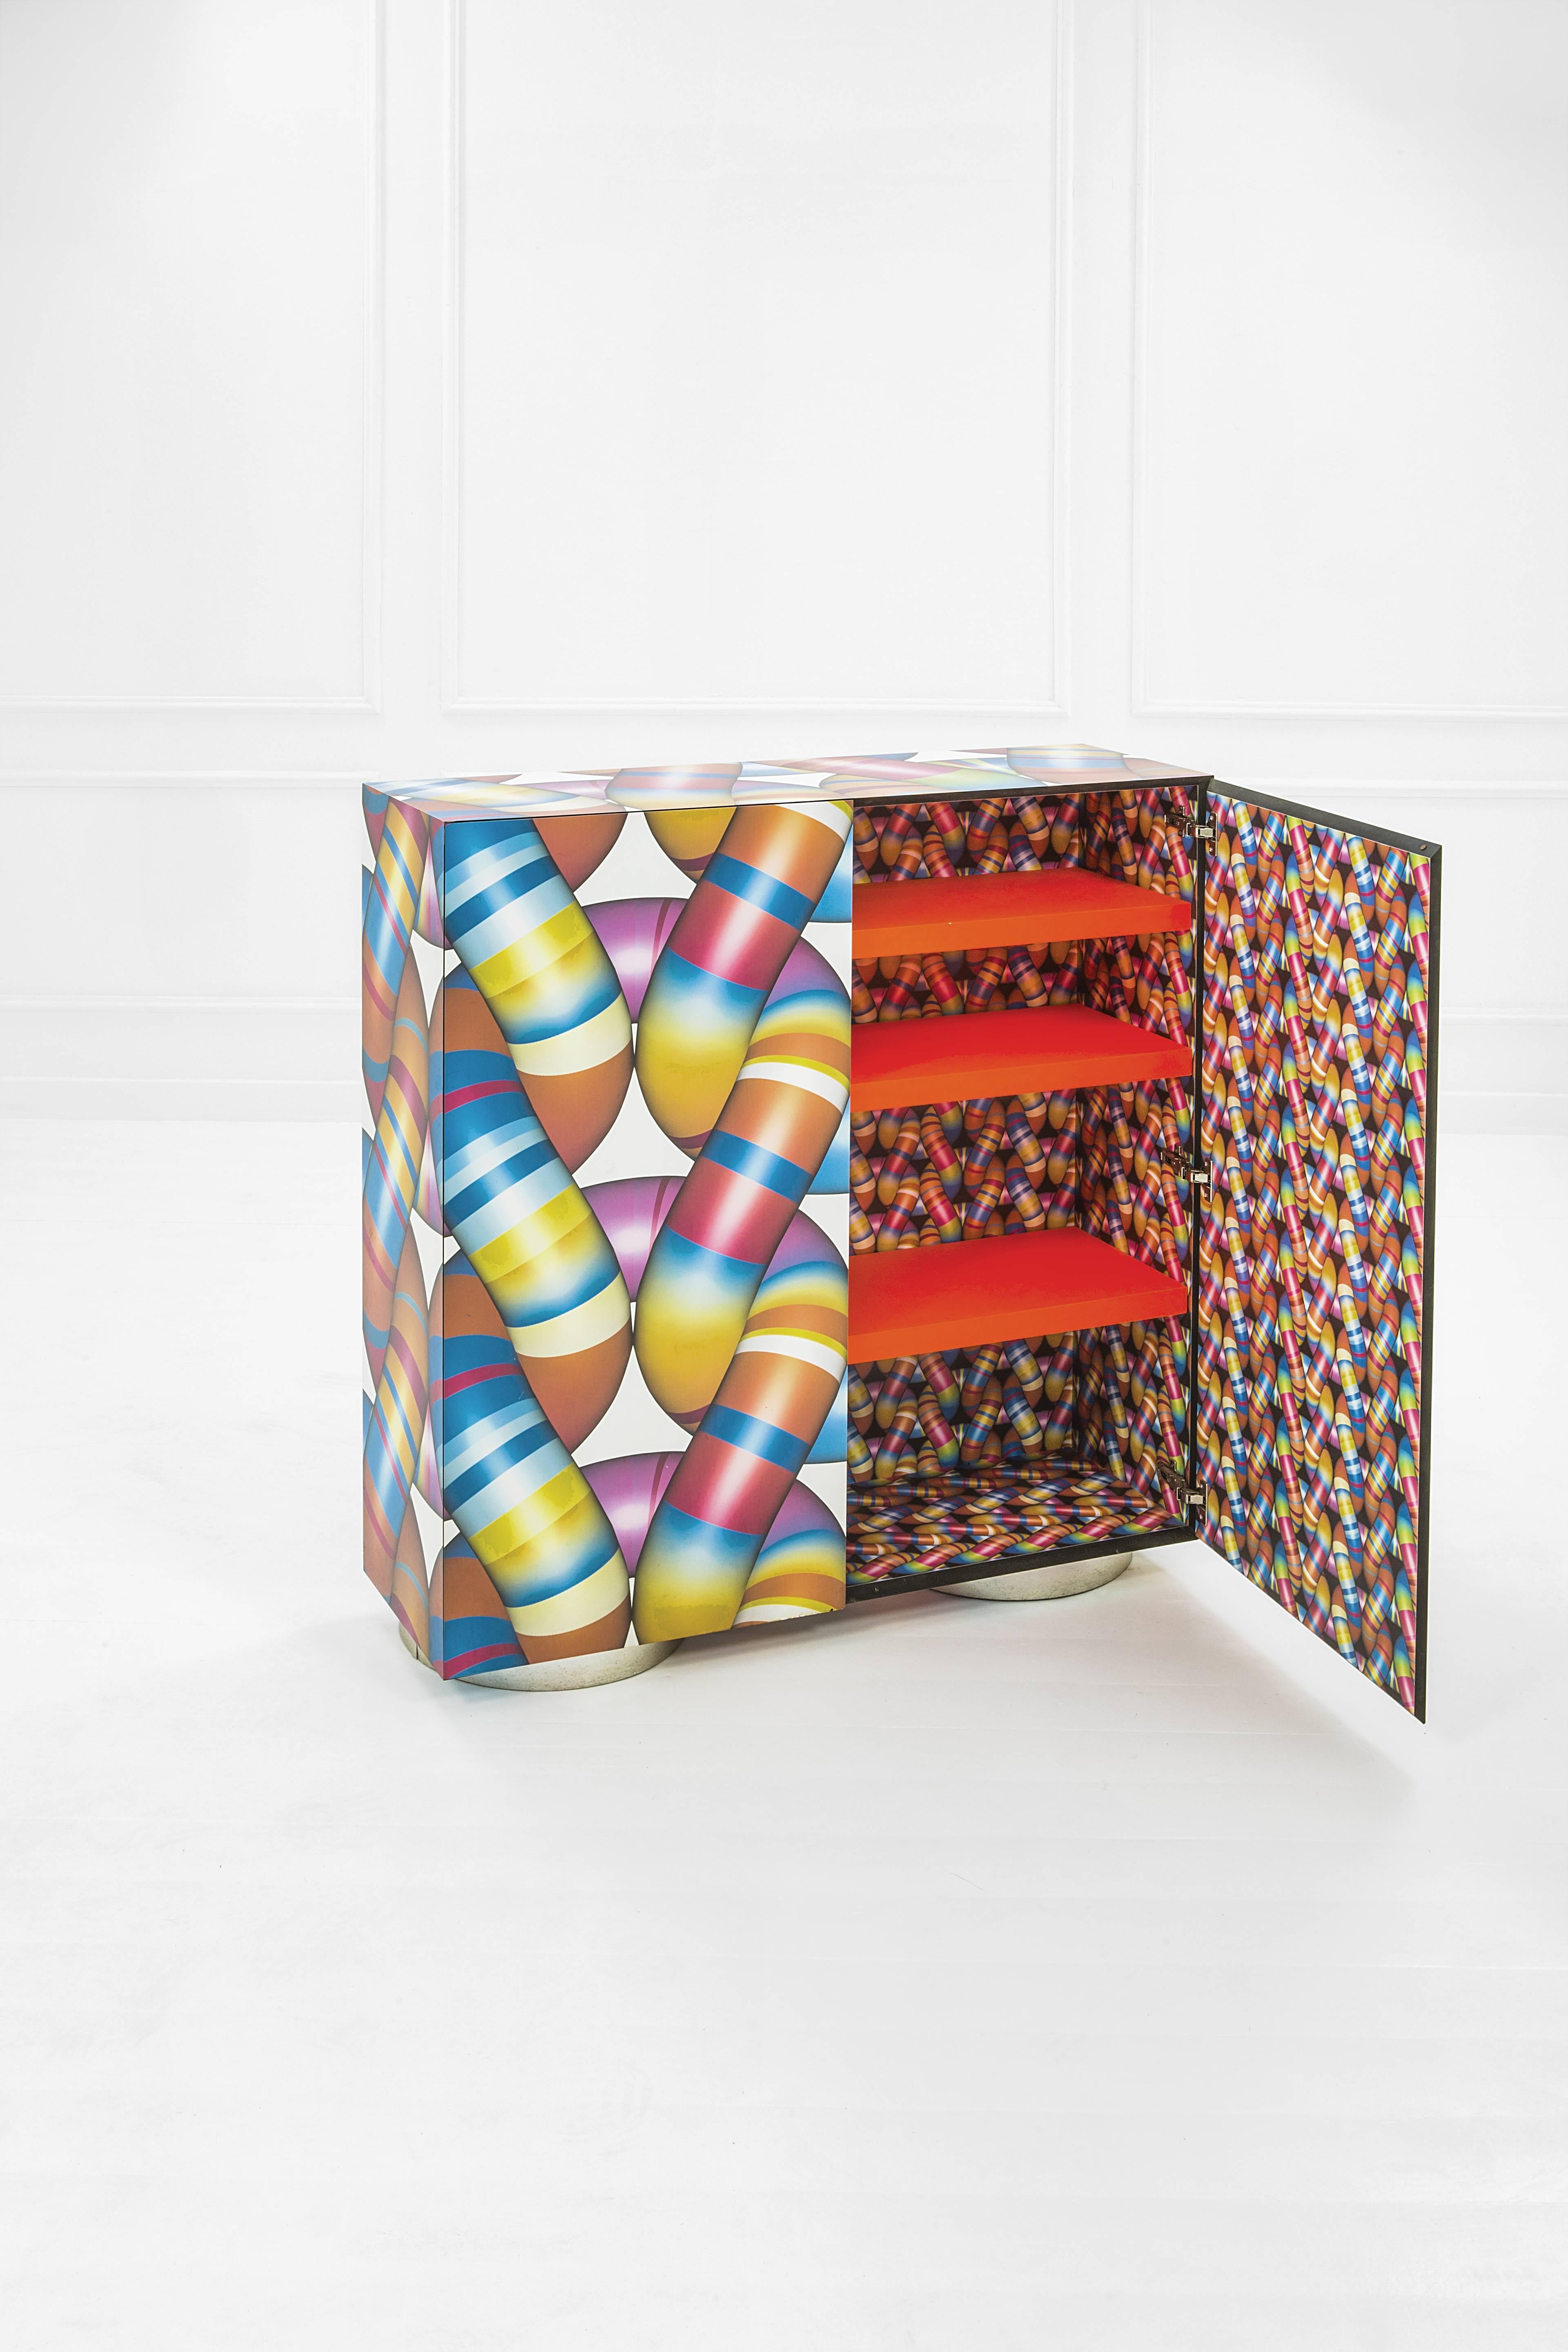 Markus Benesch (1961), sideboard of the La Casa Di Alice collection,
Laminated plastic and steel,
Limited edition of two copies,
Memphis manufacturer,
circa 2005, Italy.

Measures: Height 124 cm, width 118 cm, depth 36 cm.

Markus Benesch is a